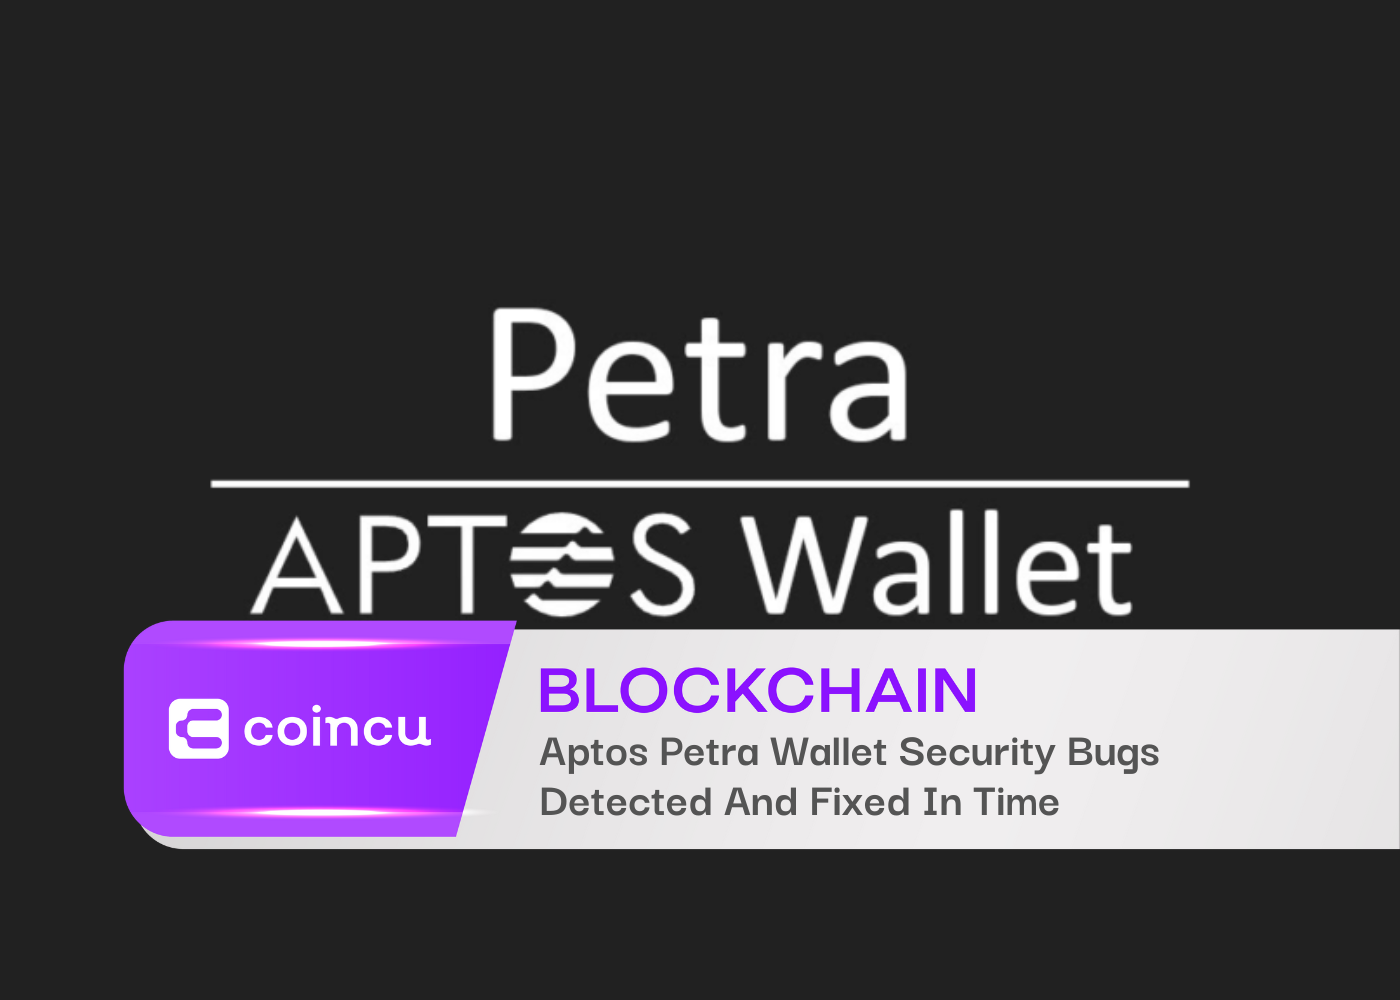 Aptos Petra Wallet Security Bugs Detected And Fixed In Time